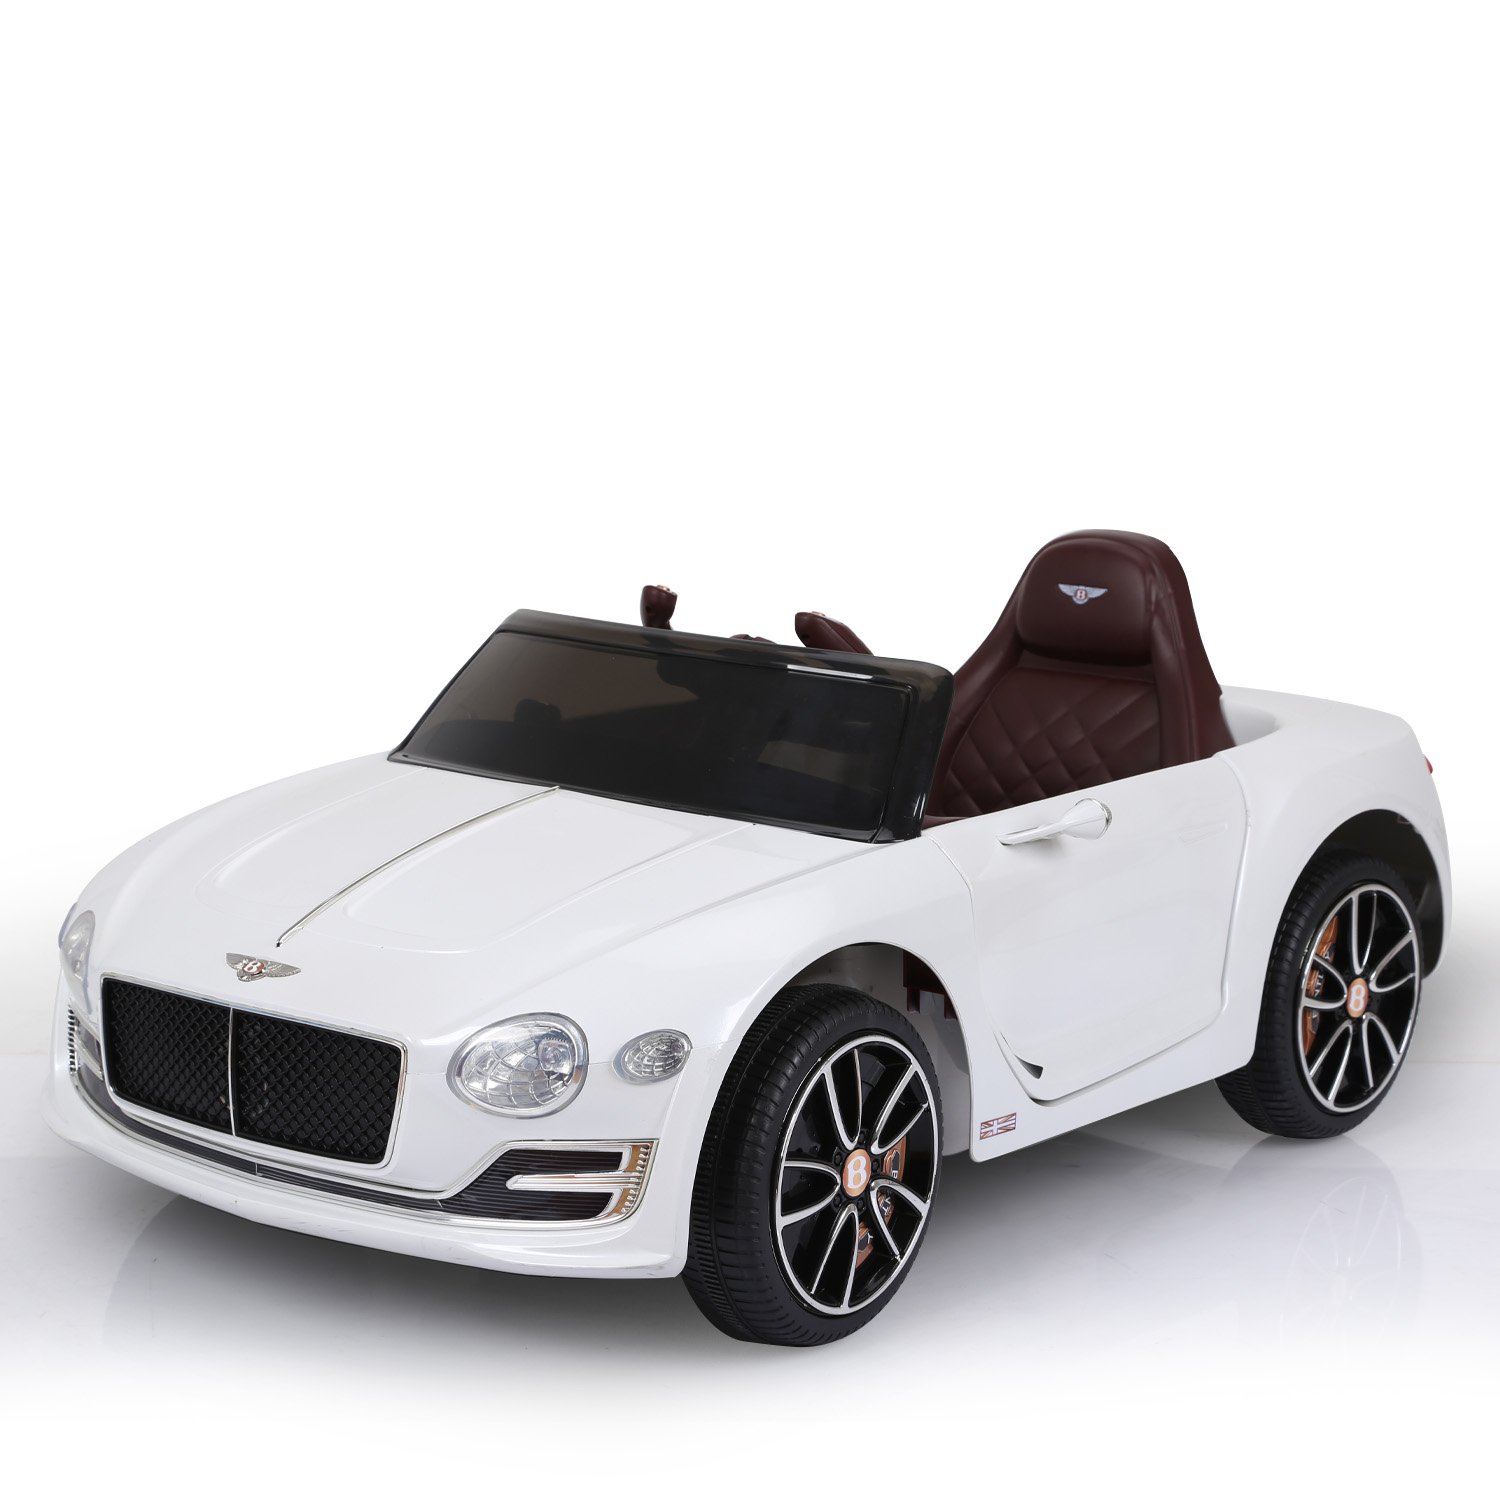 Bentley Exp 12 Speed 6E Licensed Kids Ride On Electric Car Remote Control - White 1